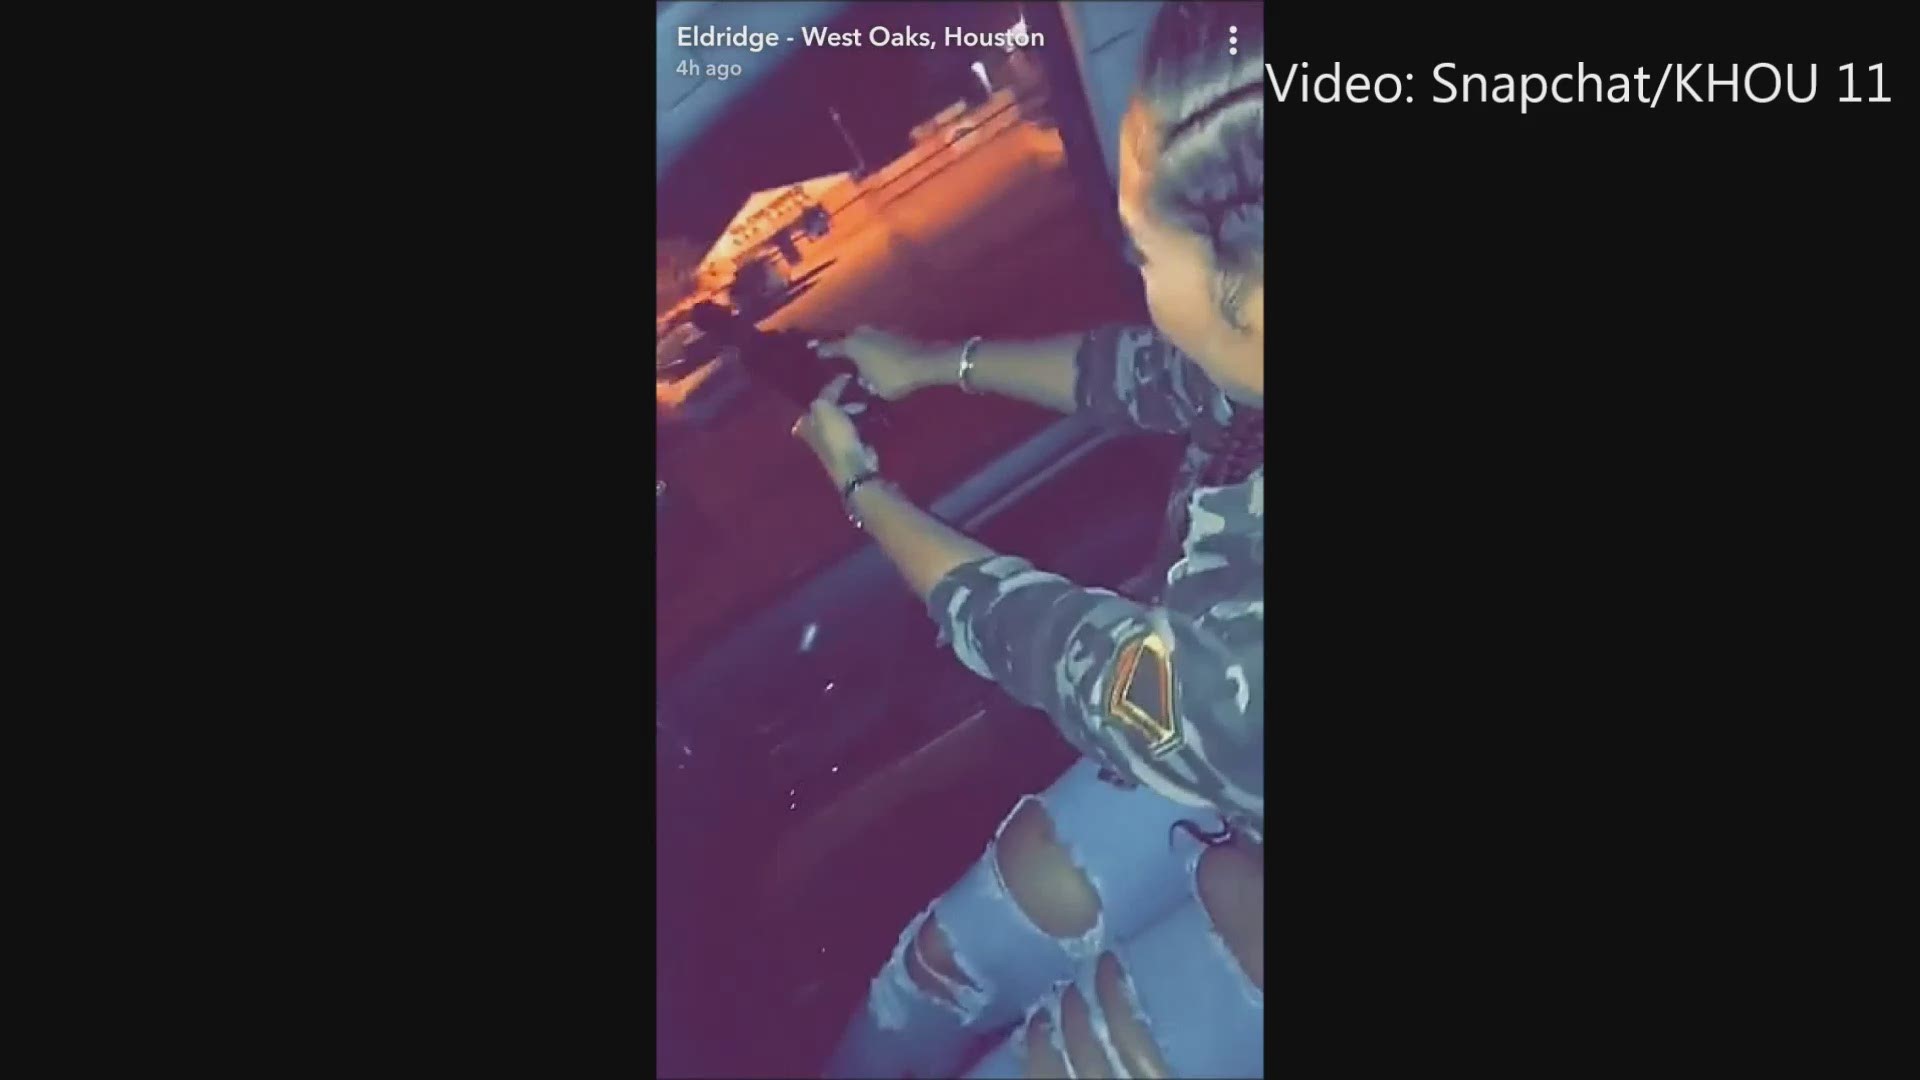 Video: Snapchat ' Call Houston Crime Stoppers at 713-222-TIPS if you have any information.